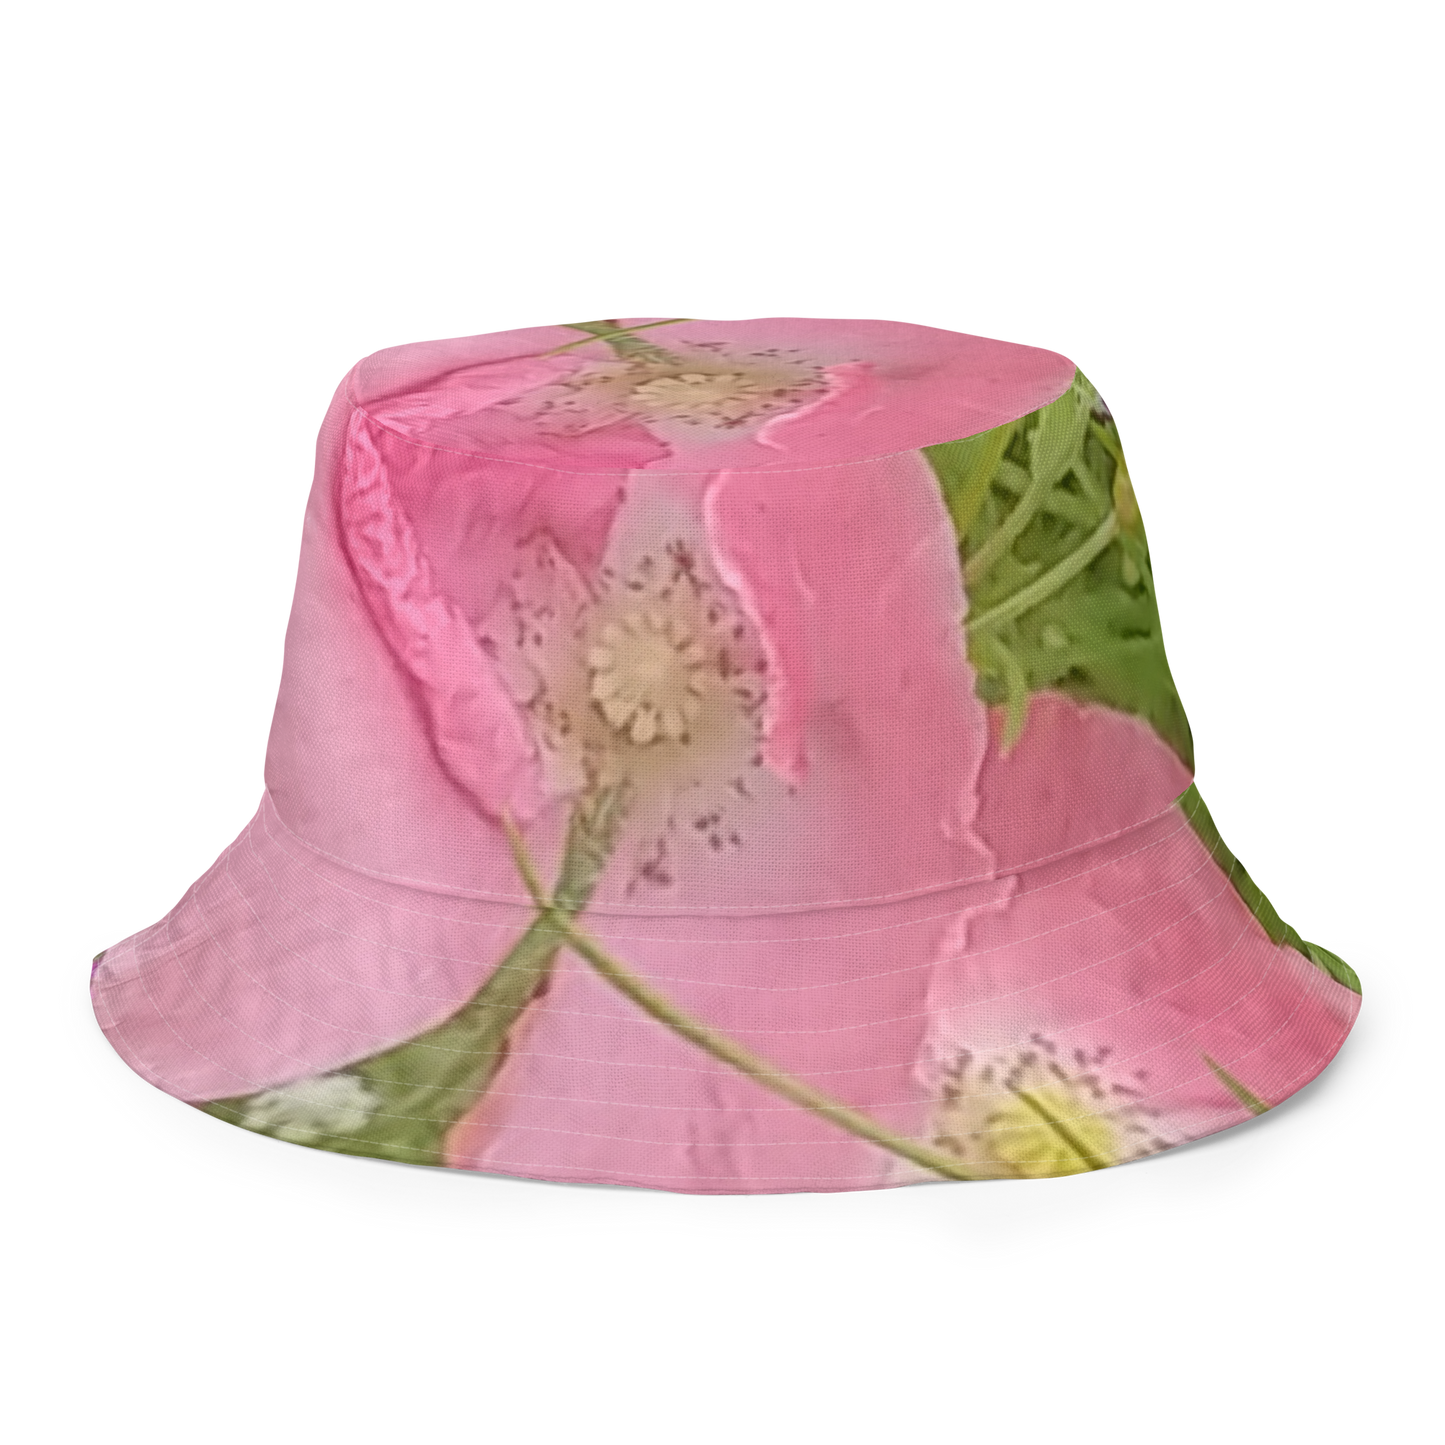 The FLOWER LOVE Collection - "Pretty Pink Poppies" Design Premium Reversible Bucket Hat - Pink Inside - Beach Hat, Gifts for Her